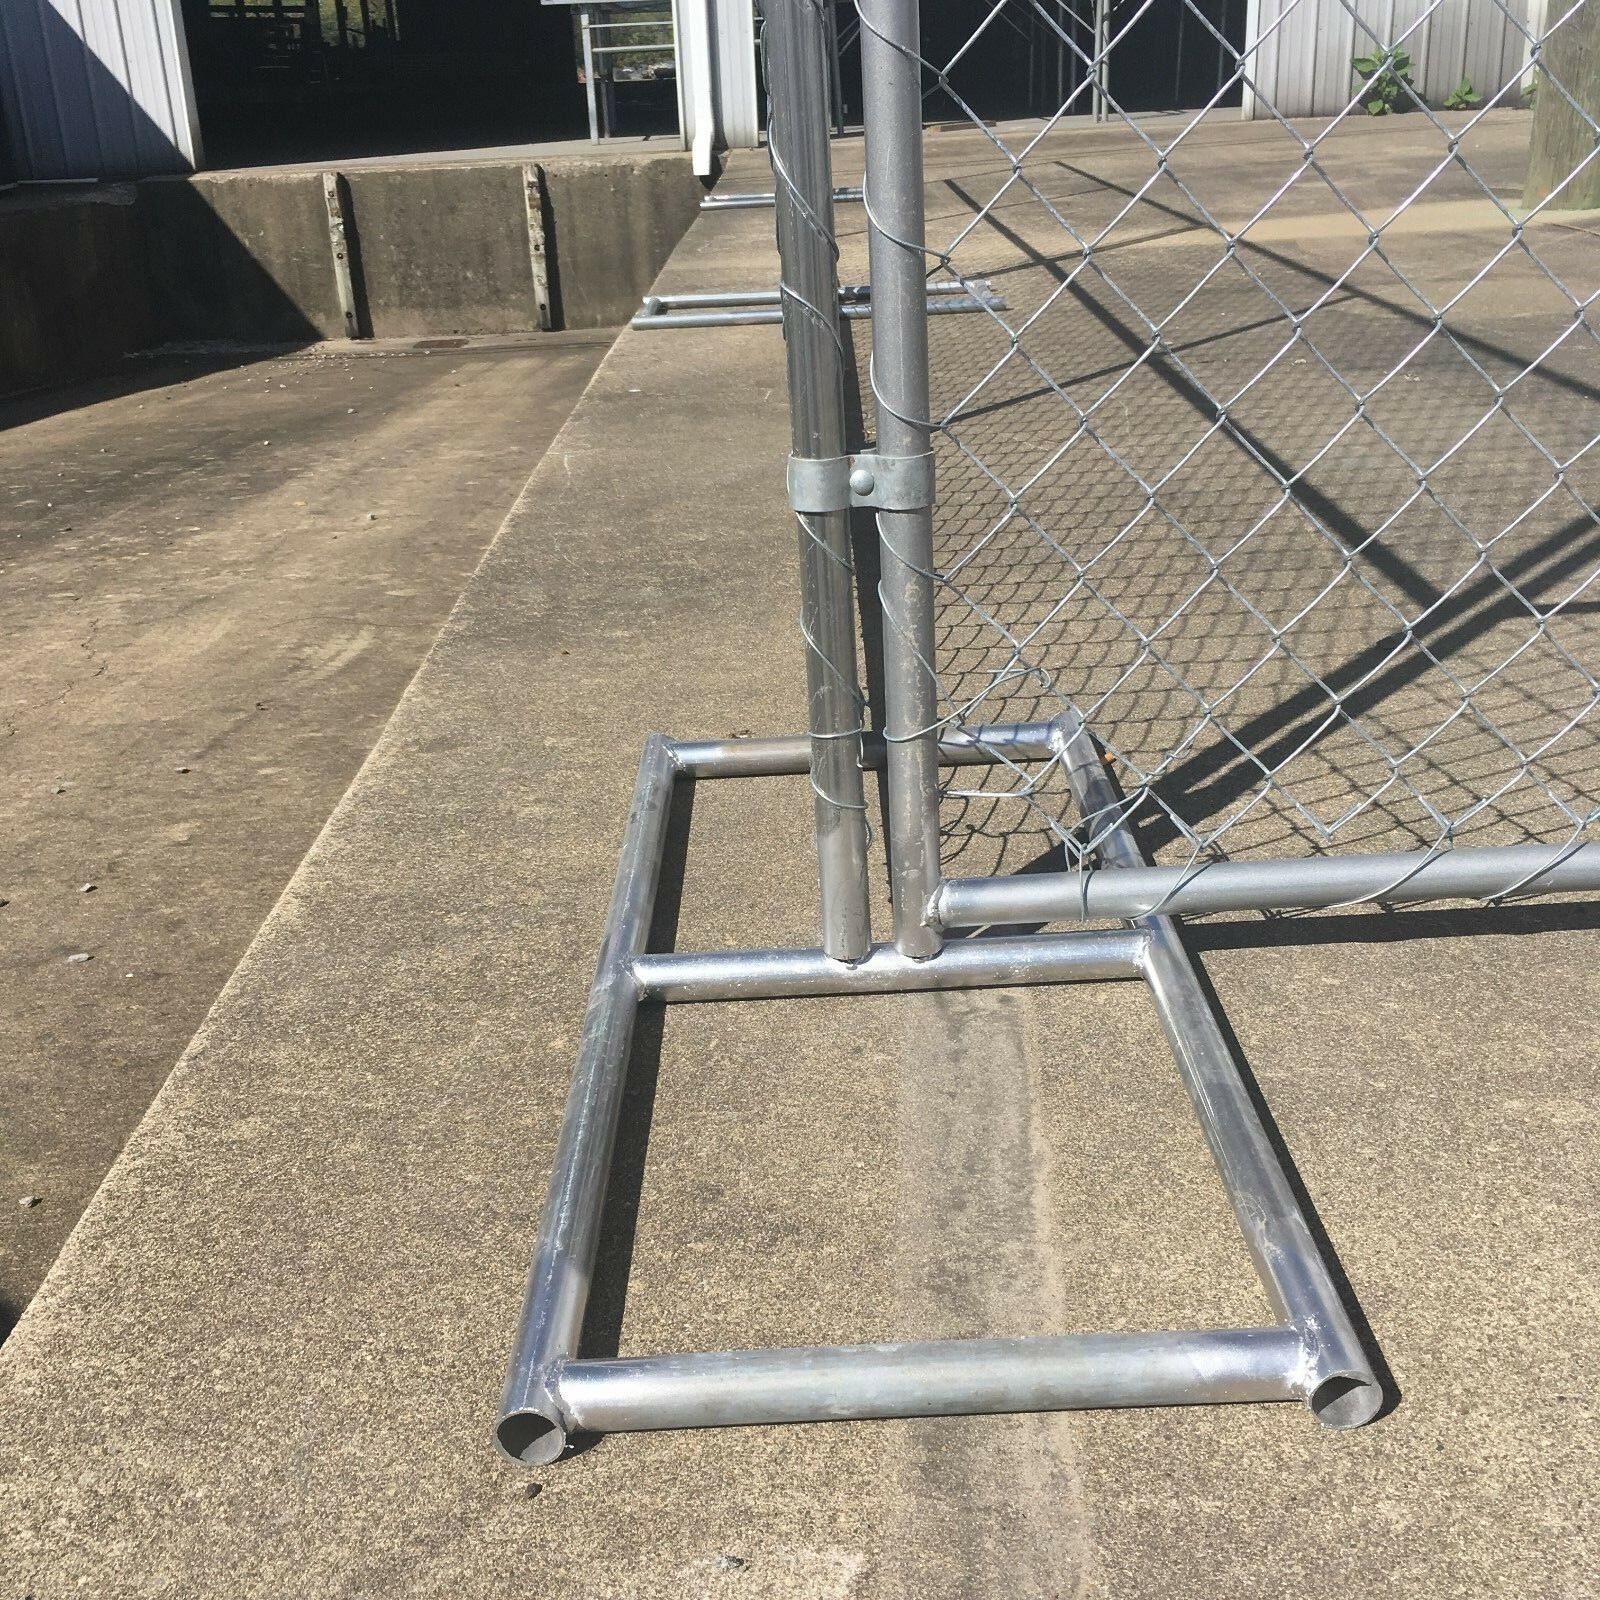 Stands or Feet for Temporary Construction Fence